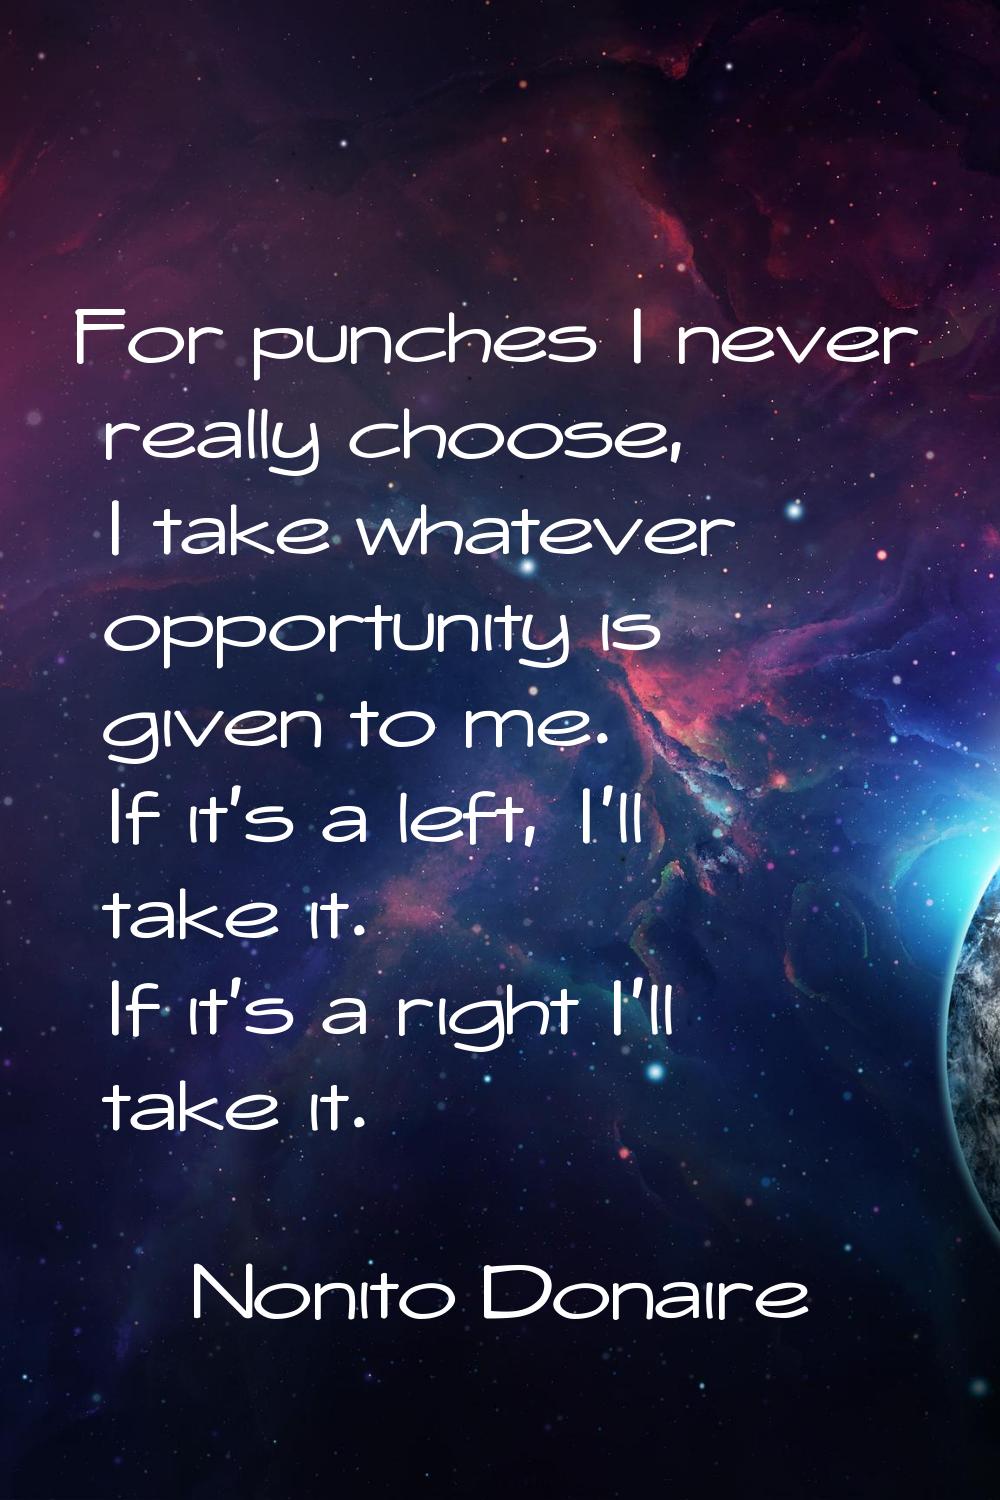 For punches I never really choose, I take whatever opportunity is given to me. If it's a left, I'll